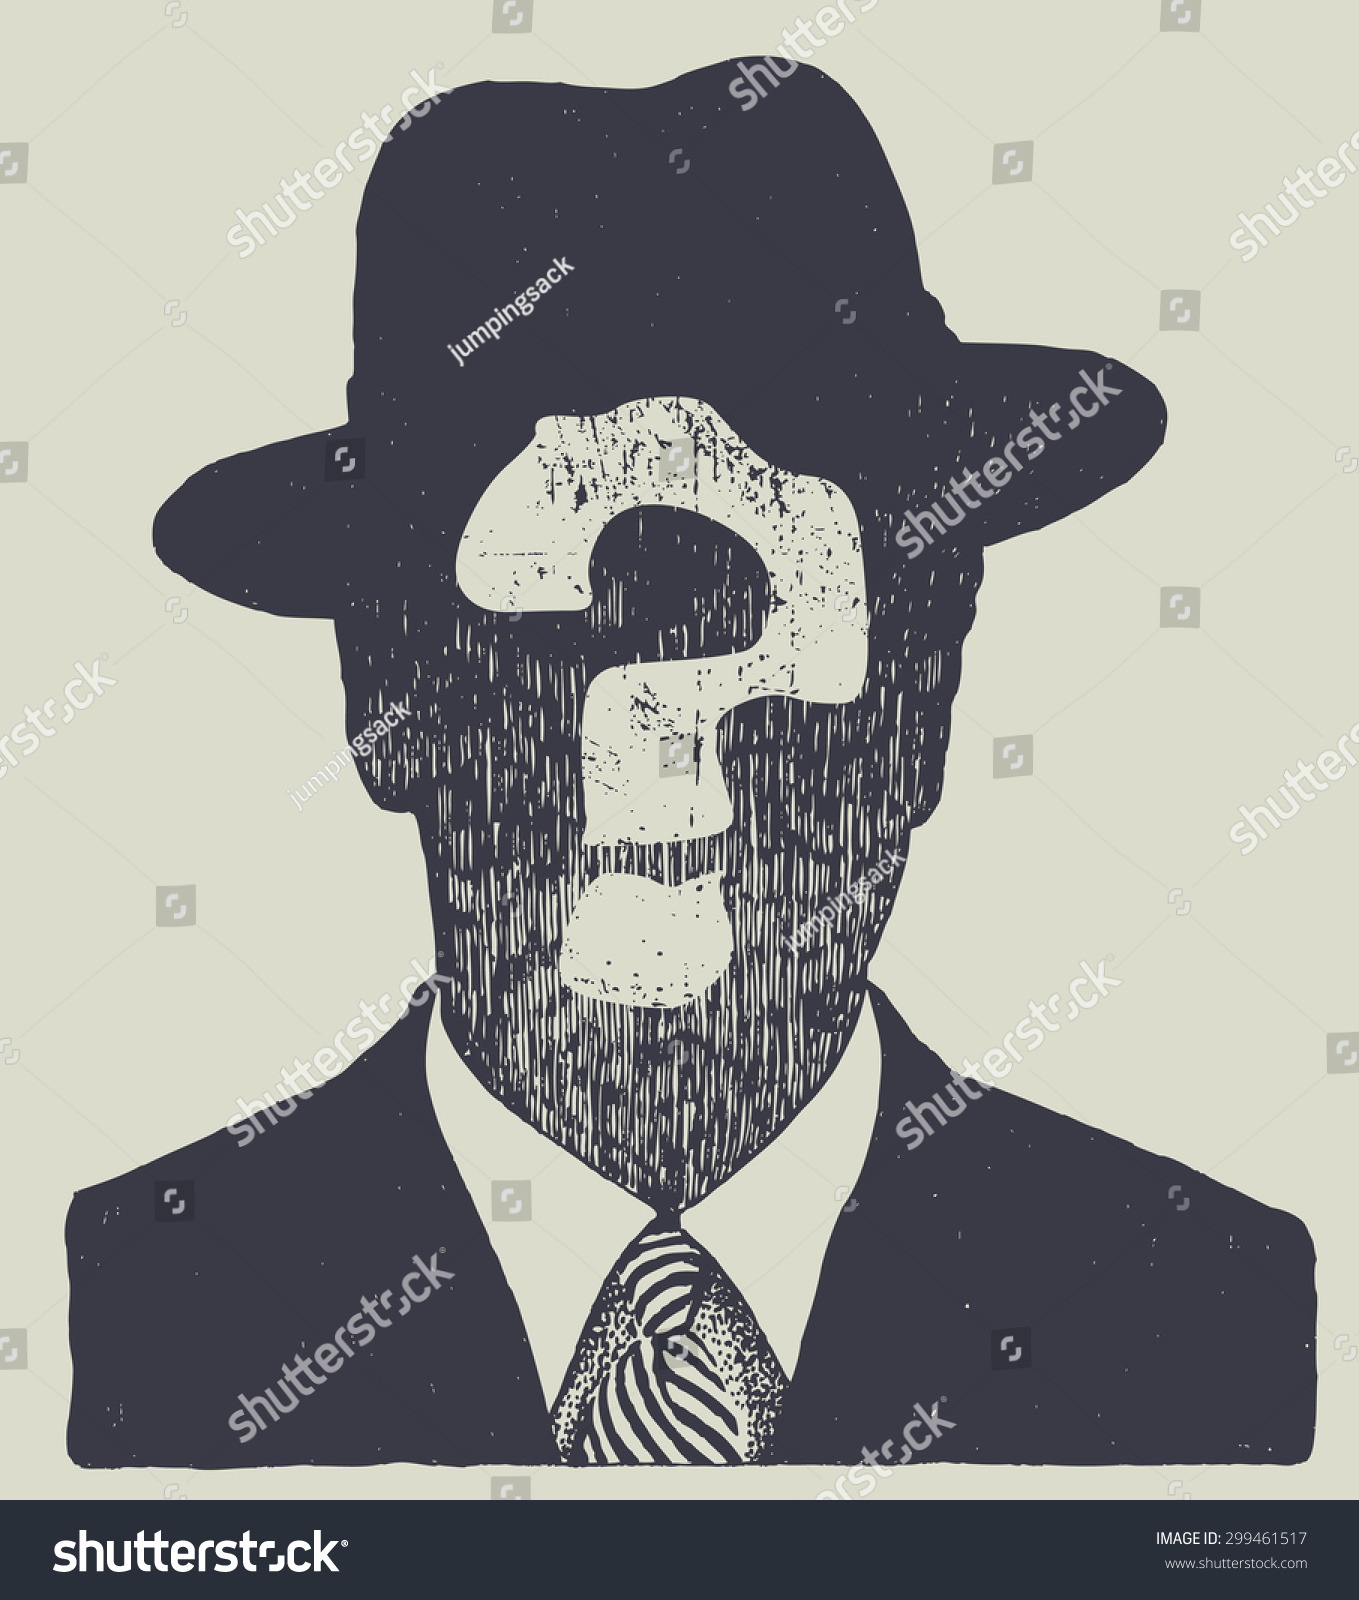 stock-vector-silhouette-of-an-unknown-man-in-a-hat-and-suit-vector-illustration-299461517.jpg